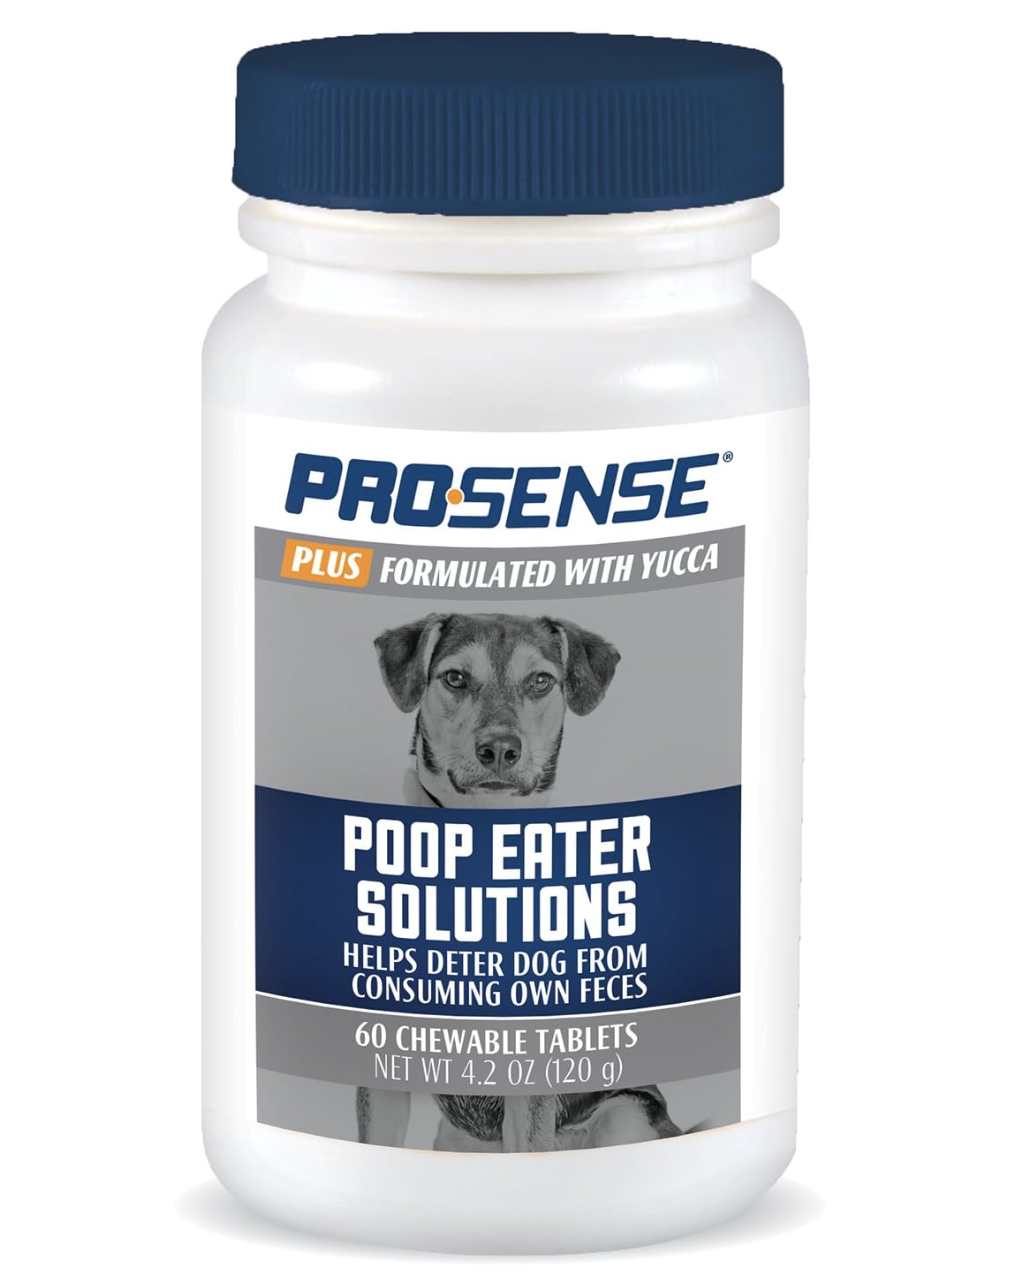 9. Pro-Sense P-87077 Poop Eater Solutions for Dogs